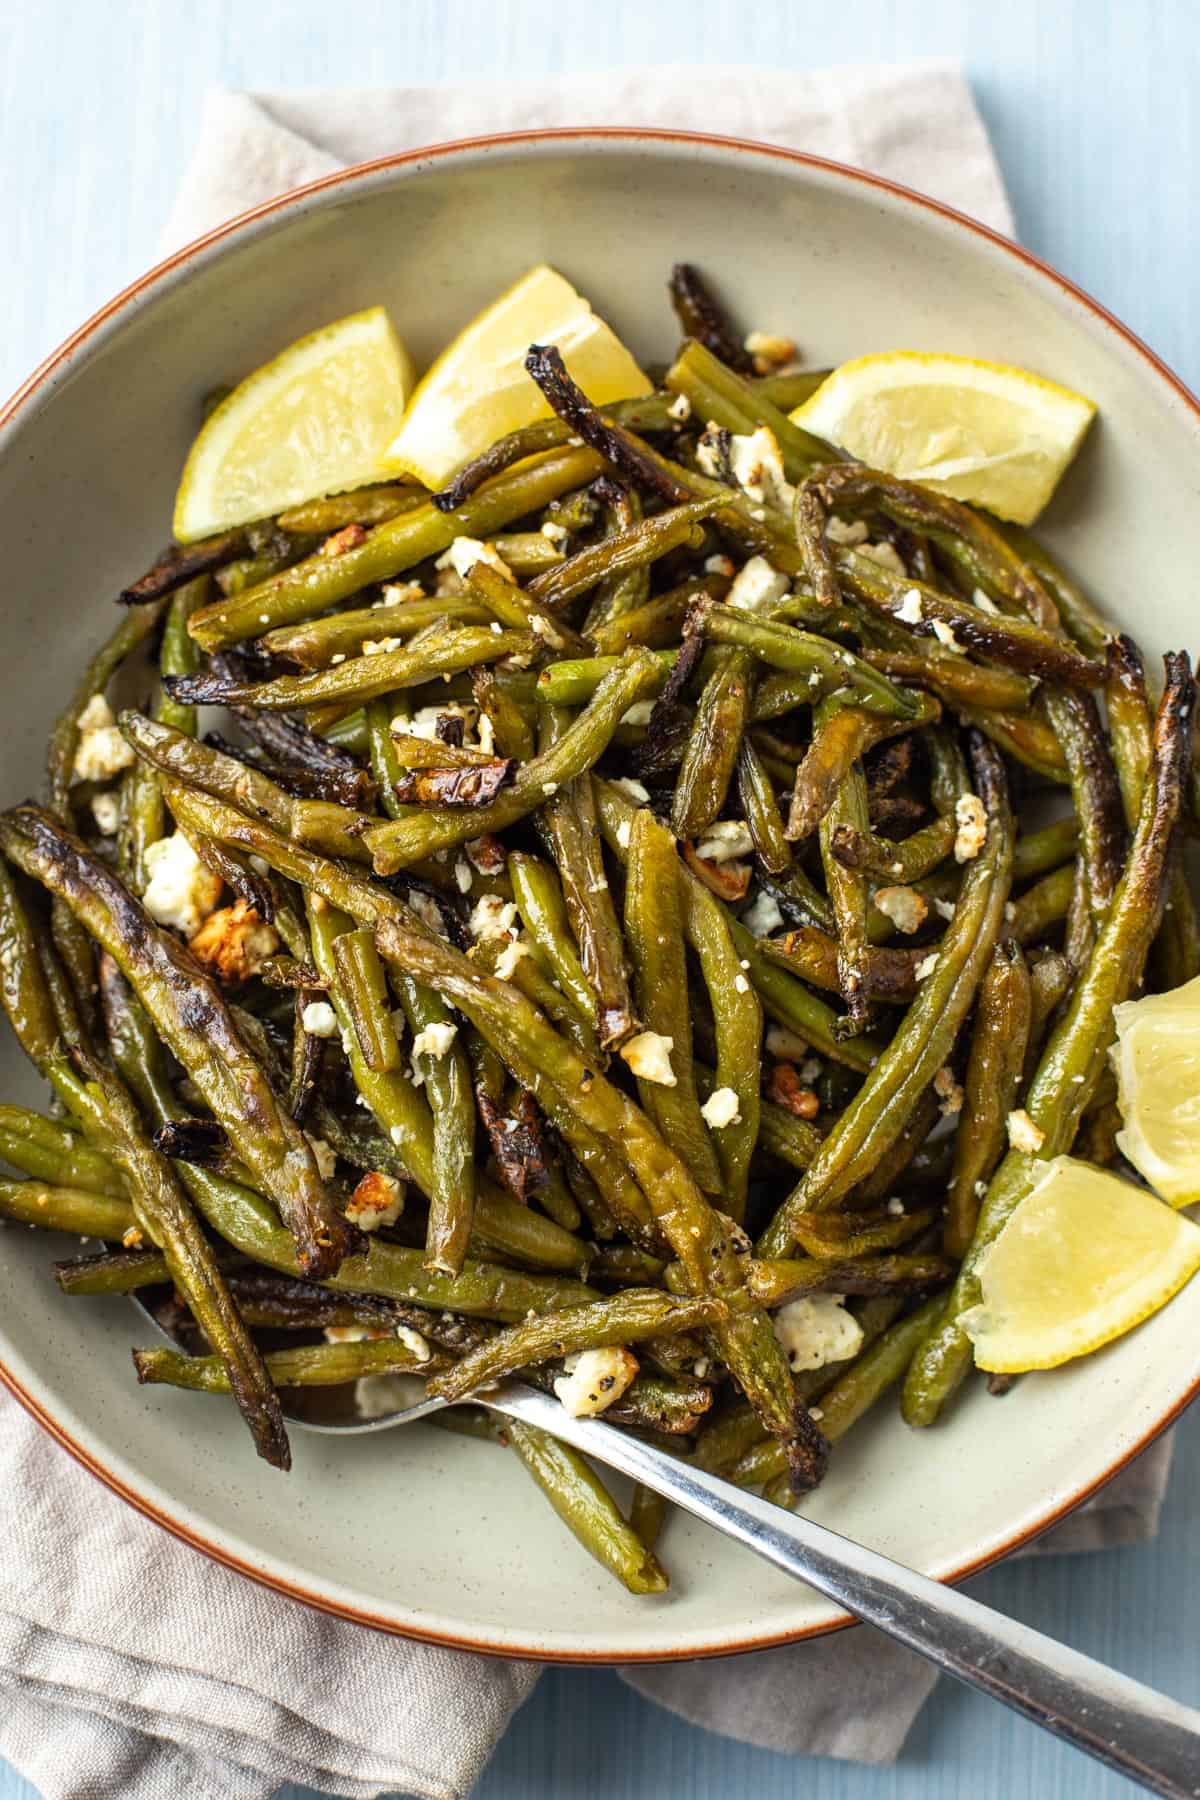 A bowl of roasted green beans with feta cheese and lemon wedges.